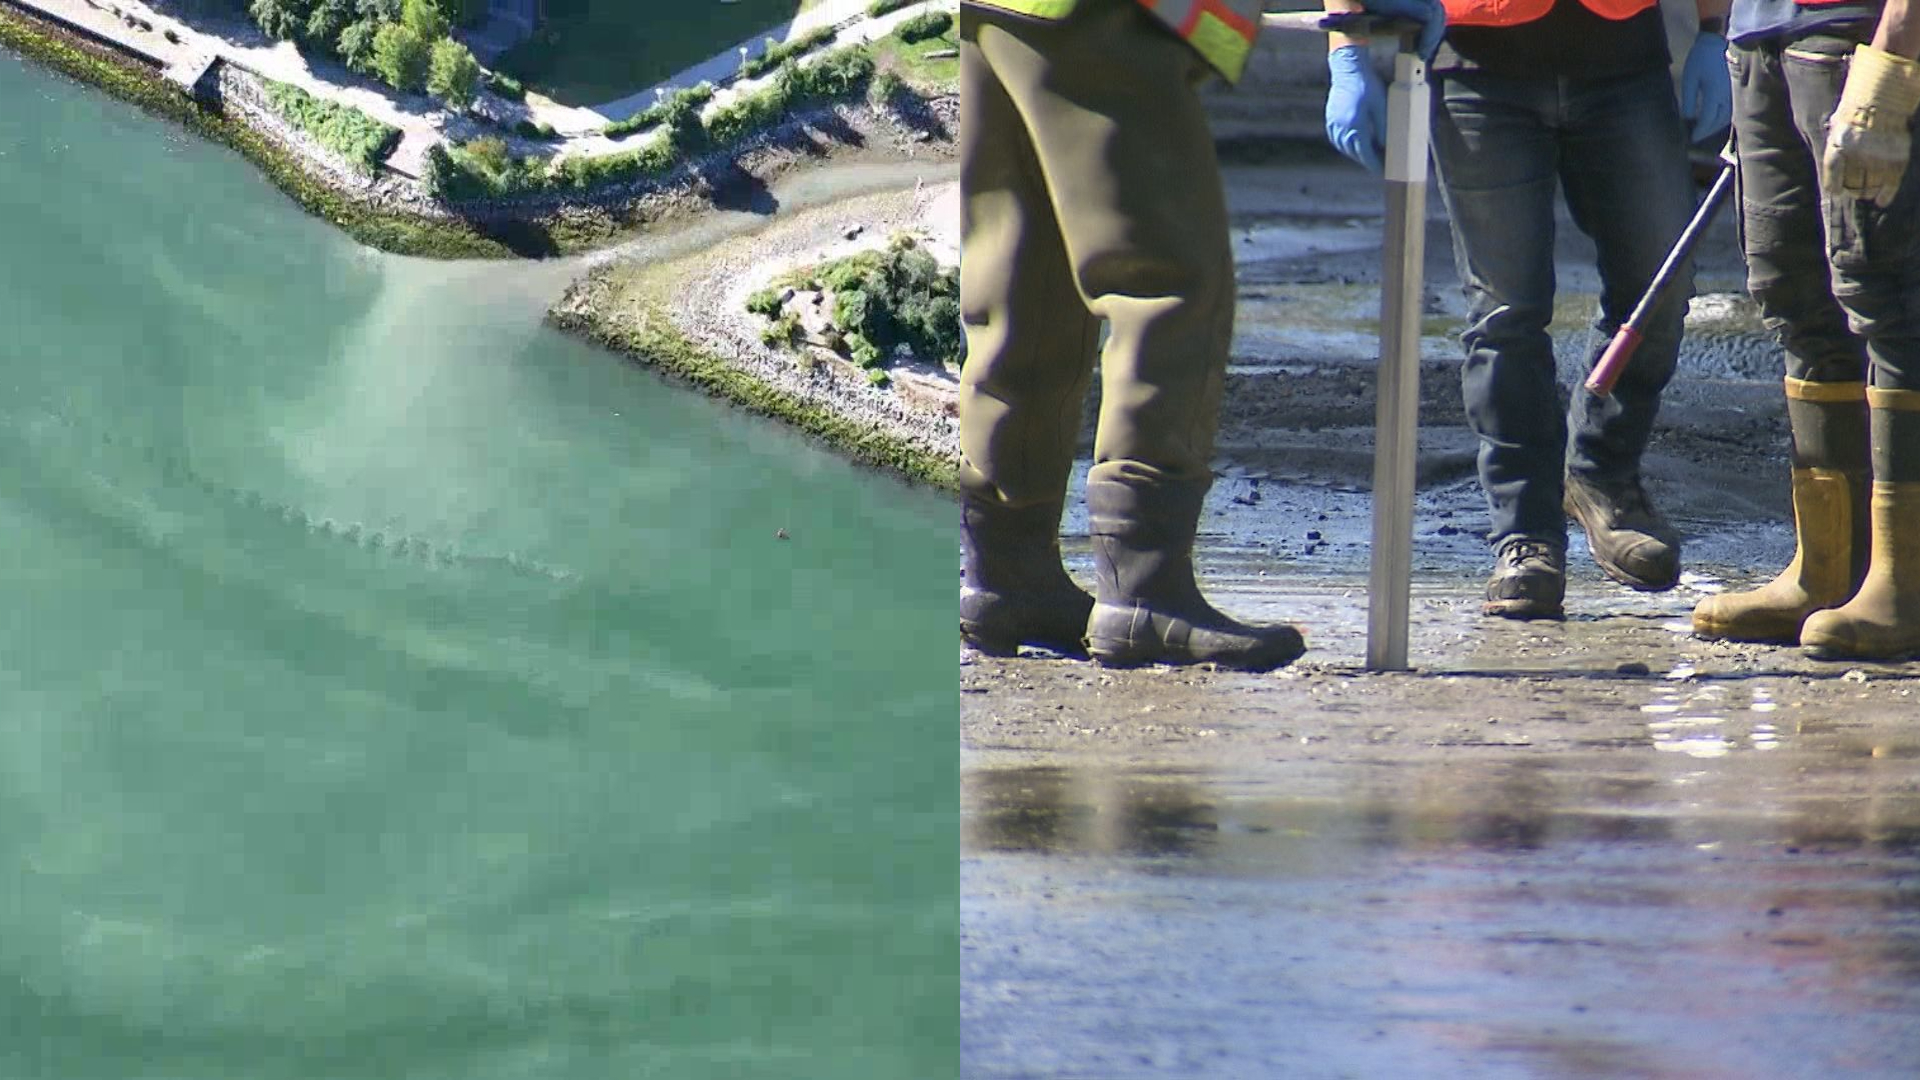 Sewage flows into False Creek after main breaks in Vancouver